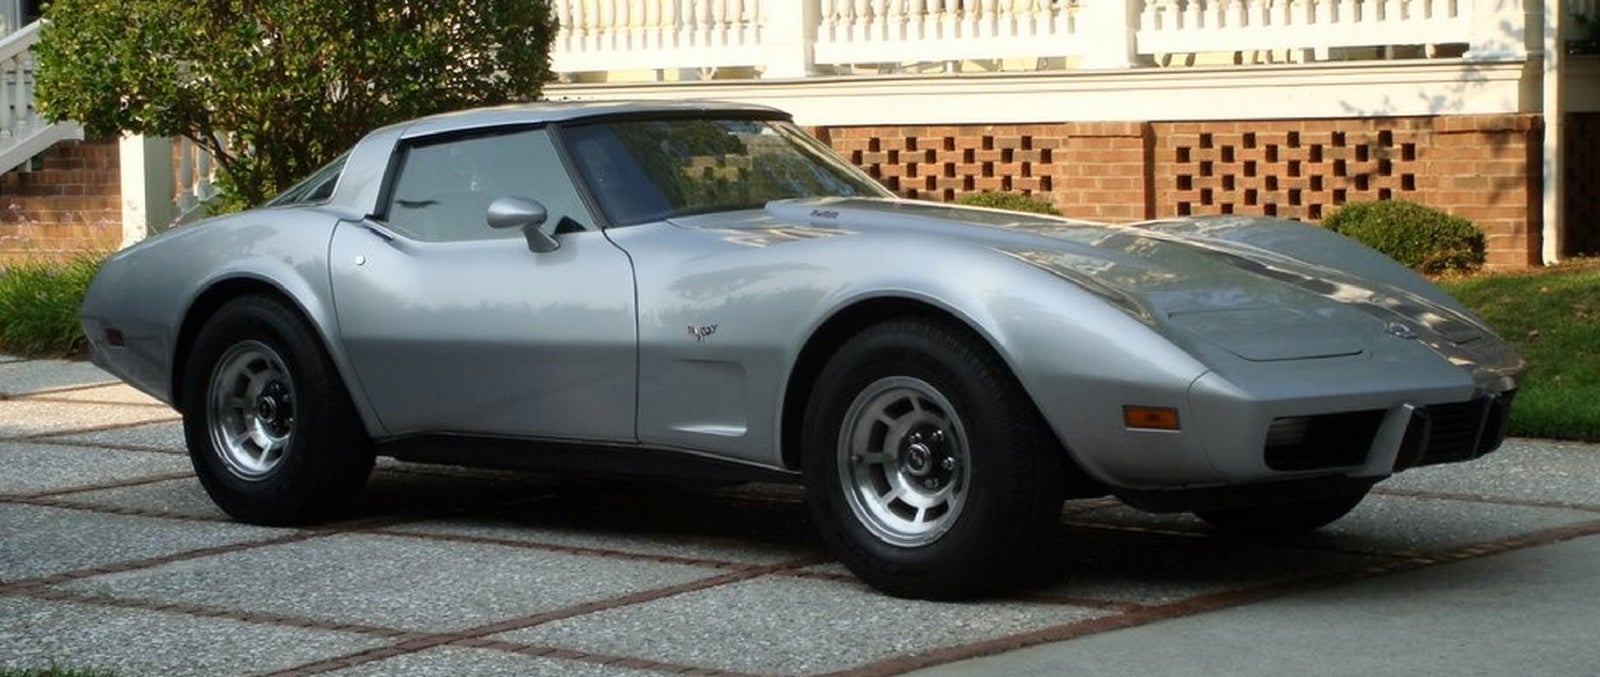 Chevrolet Corvette Questions I Am Trying To Find Out The Value Of My 1978 25th Anniversary Corvette Cargurus